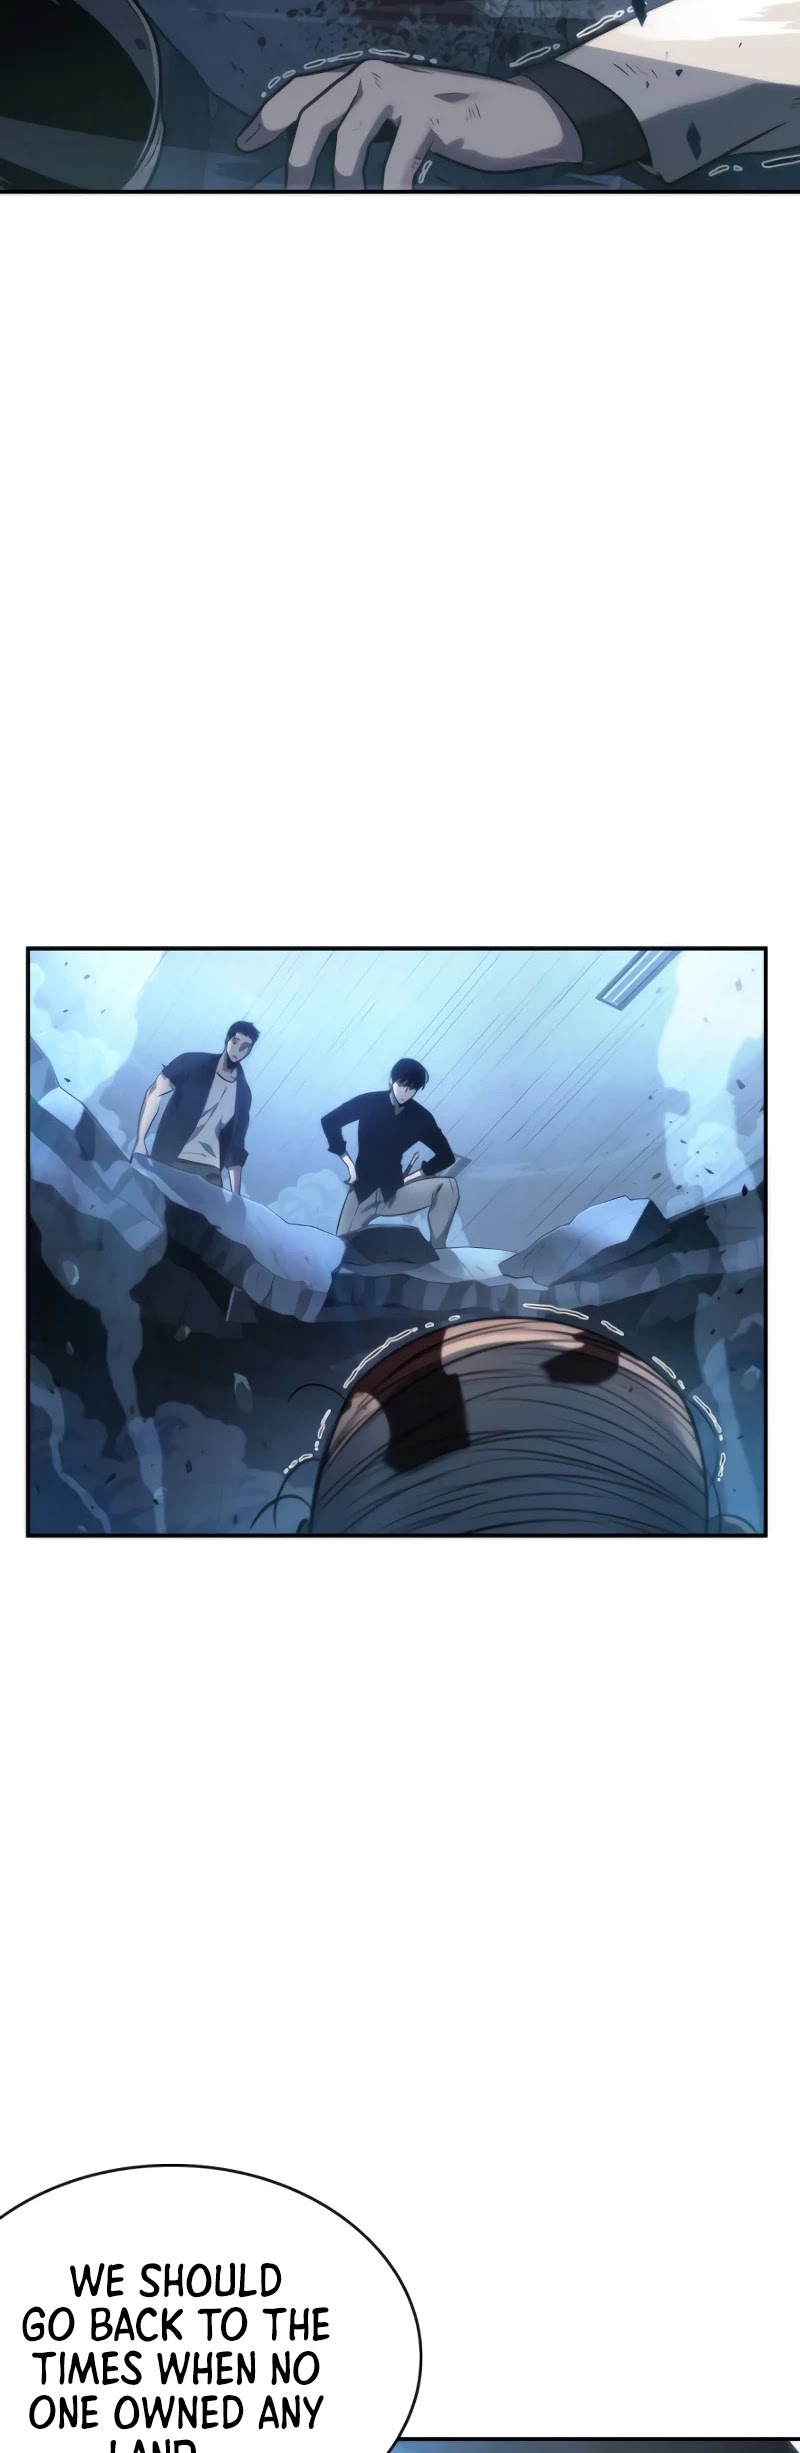 Omniscient Reader, Omniscient Reader manga, Omniscient Reader manhwa, Omniscient Reader anime, Omniscient Readers Viewpoint, read Omniscient Readers Viewpoint, Omniscient Readers Viewpoint manhwa, Omniscient Readers Viewpoint manga, omniscient reader wiki, omniscient reader reddit, omniscient reader characters, is there romance in omniscient reader, omniscient reader reaction, omniscient reader anime announced, omniscient readers viewpoint anime, omniscient reader's viewpoint anime, omniscient reader webtoon characters, omniscient reader's viewpoint, omniscient reader's viewpoint characters, omniscient reader's viewpoint reddit, omniscient reader's viewpoint ao3, omniscient readers viewpoint reddit, omniscient reader 56, omniscient reader's viewpoint fanfic, omniscient reader's viewpoint kim dokja, omniscient reader's viewpoint yoo jonghyuk, omniscient reader's viewpoint movie, read omniscient reader's viewpoint, omniscient reader's viewpoint epub